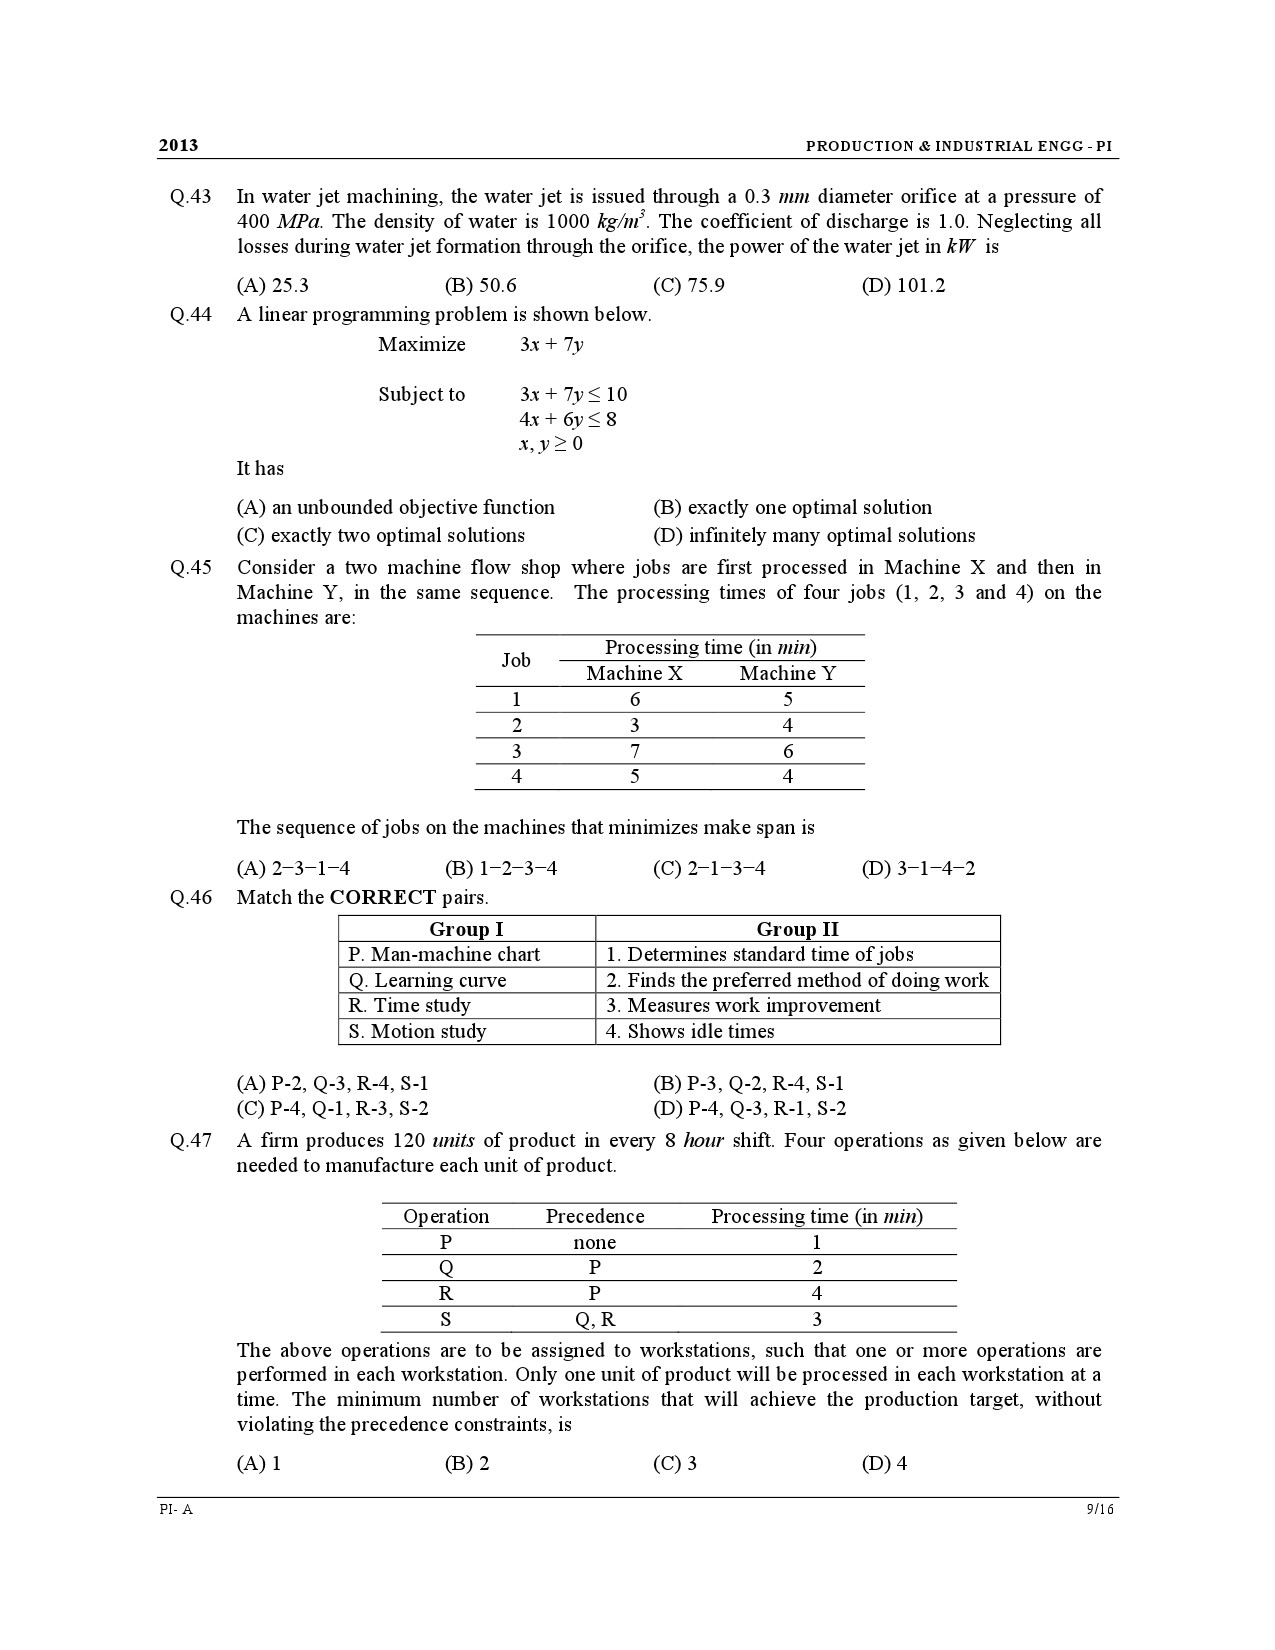 GATE Exam Question Paper 2013 Production and Industrial Engineering 9